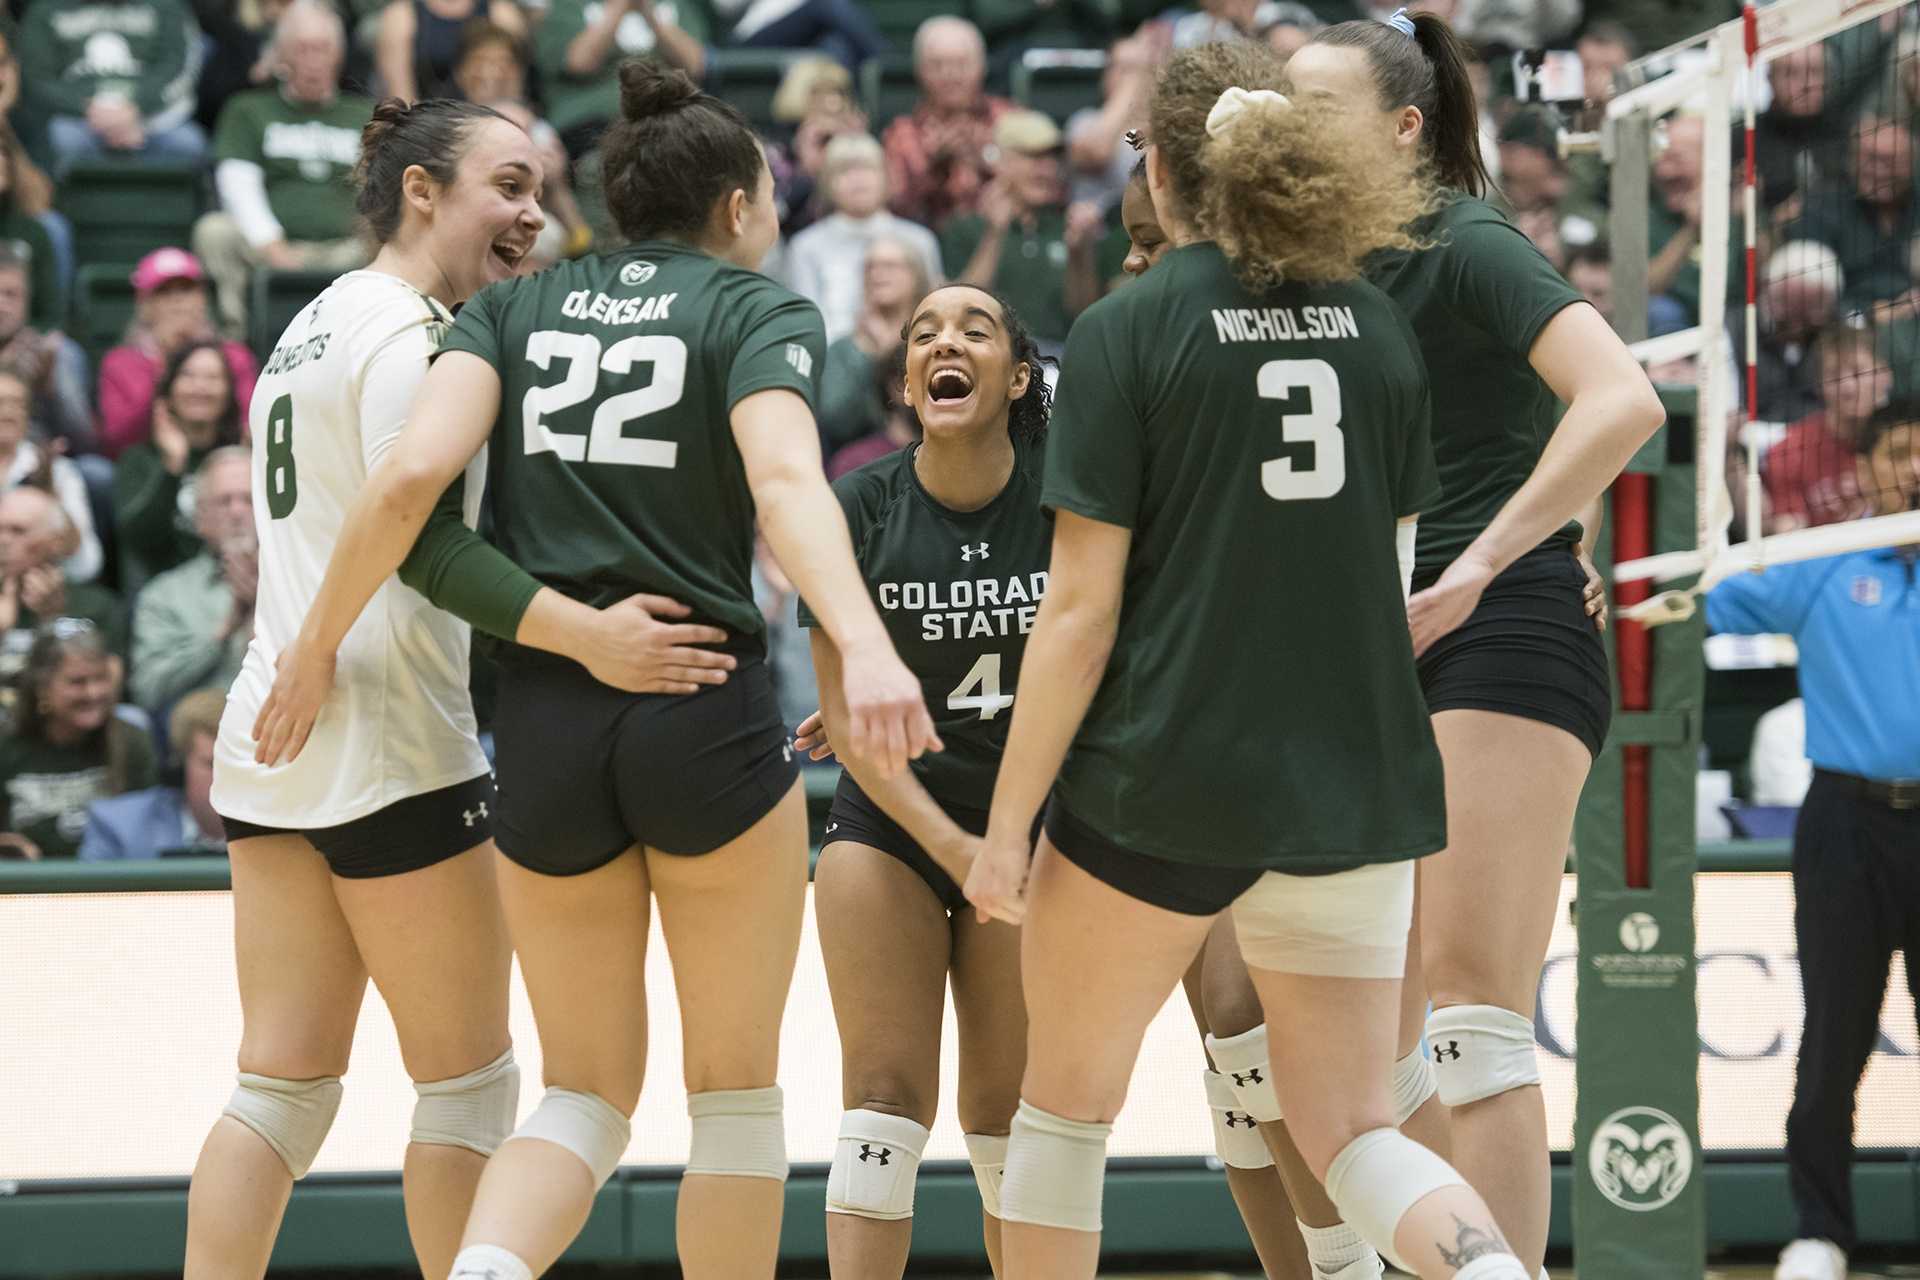 Freshman Brooke Hudson celebrates a point in the huddle with her volleyball teammates in the second match.